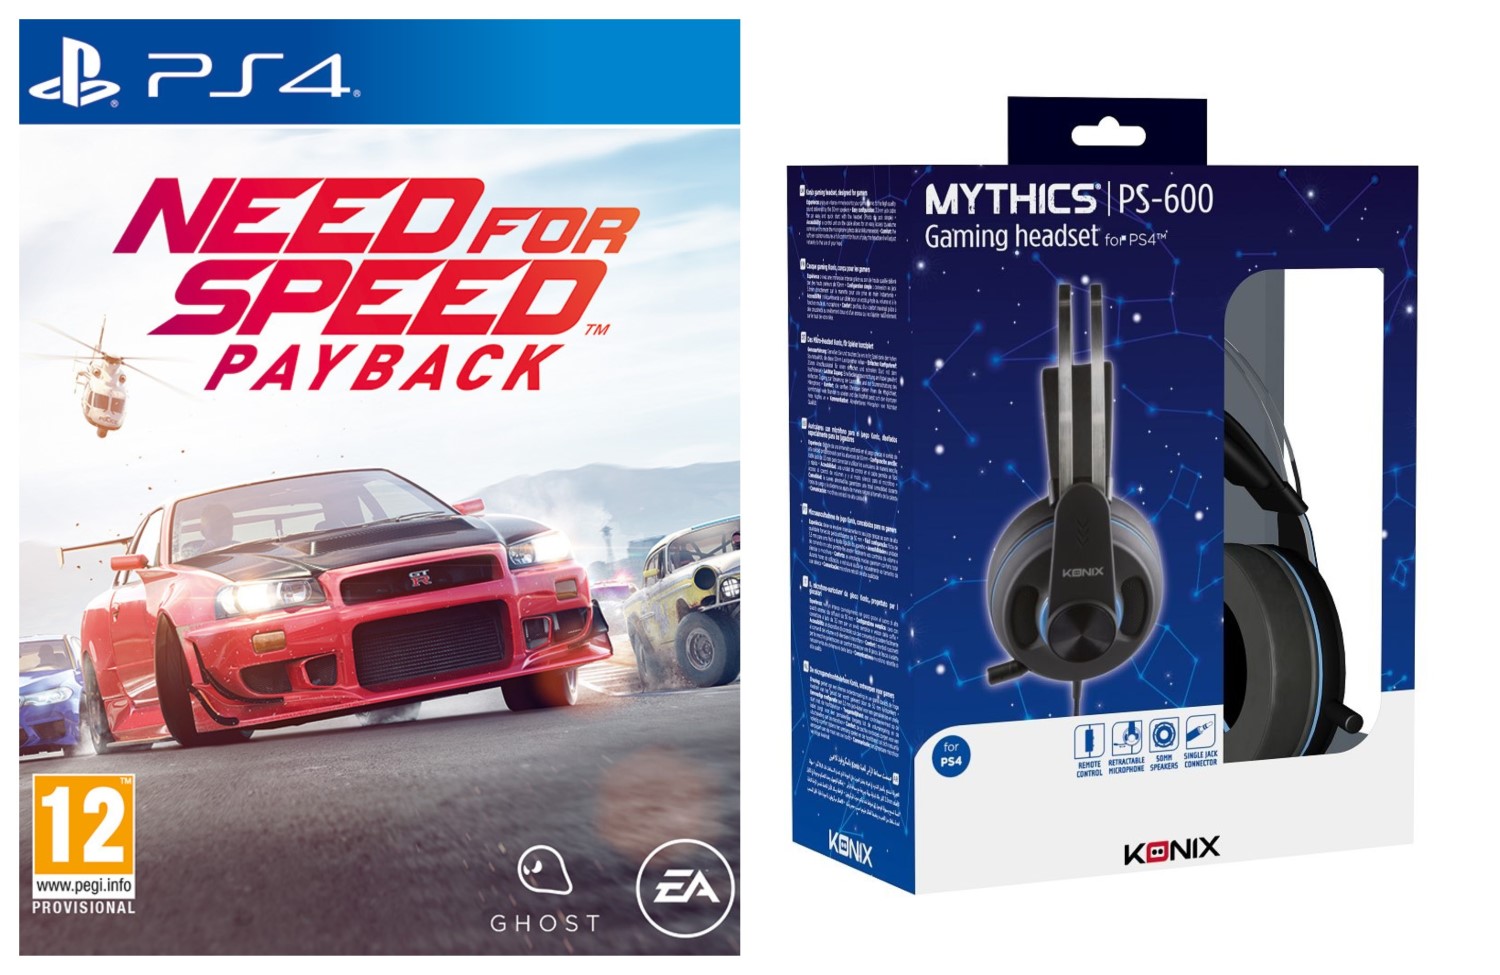 Need for Speed Payback PS4 + KONIX Mythics PS-600 Gaming Headset for PS4